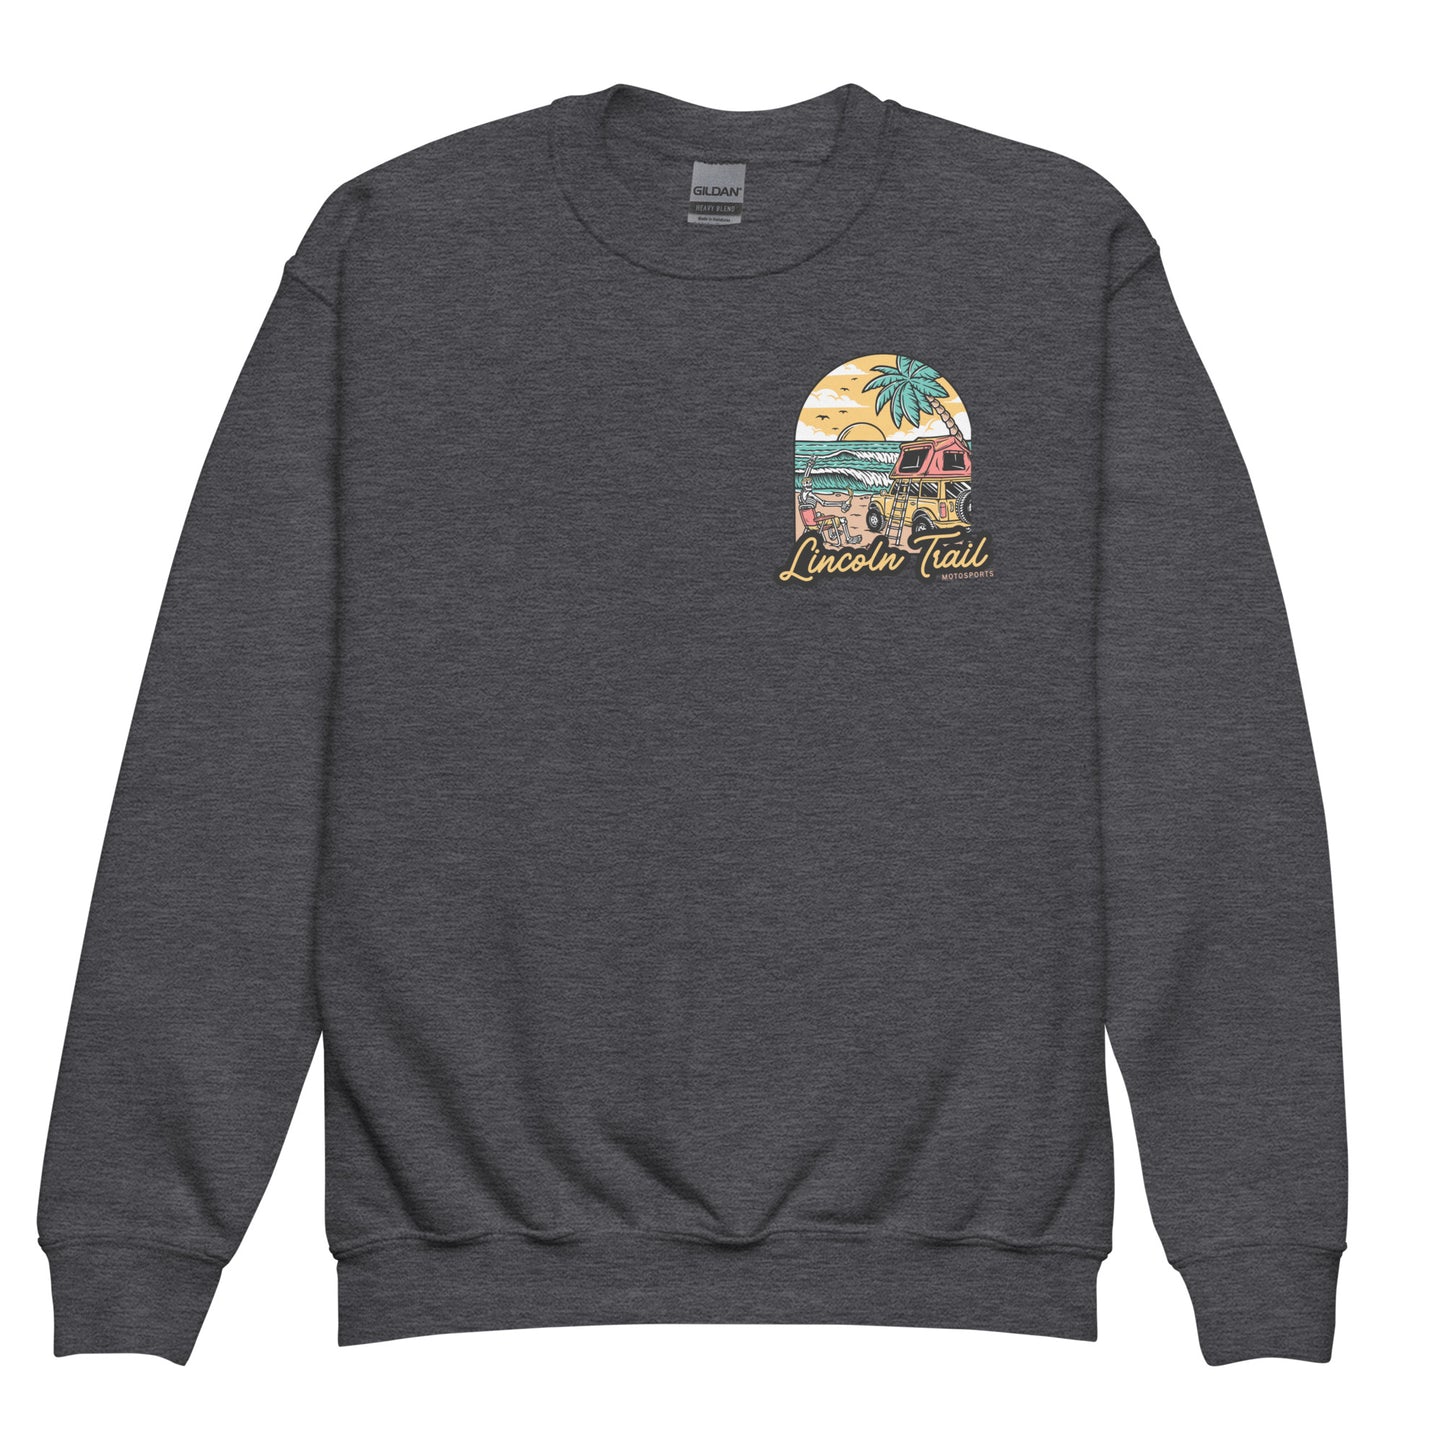 Lincoln Trail Good Times, Good Rides YOUTH Crewneck Sweater